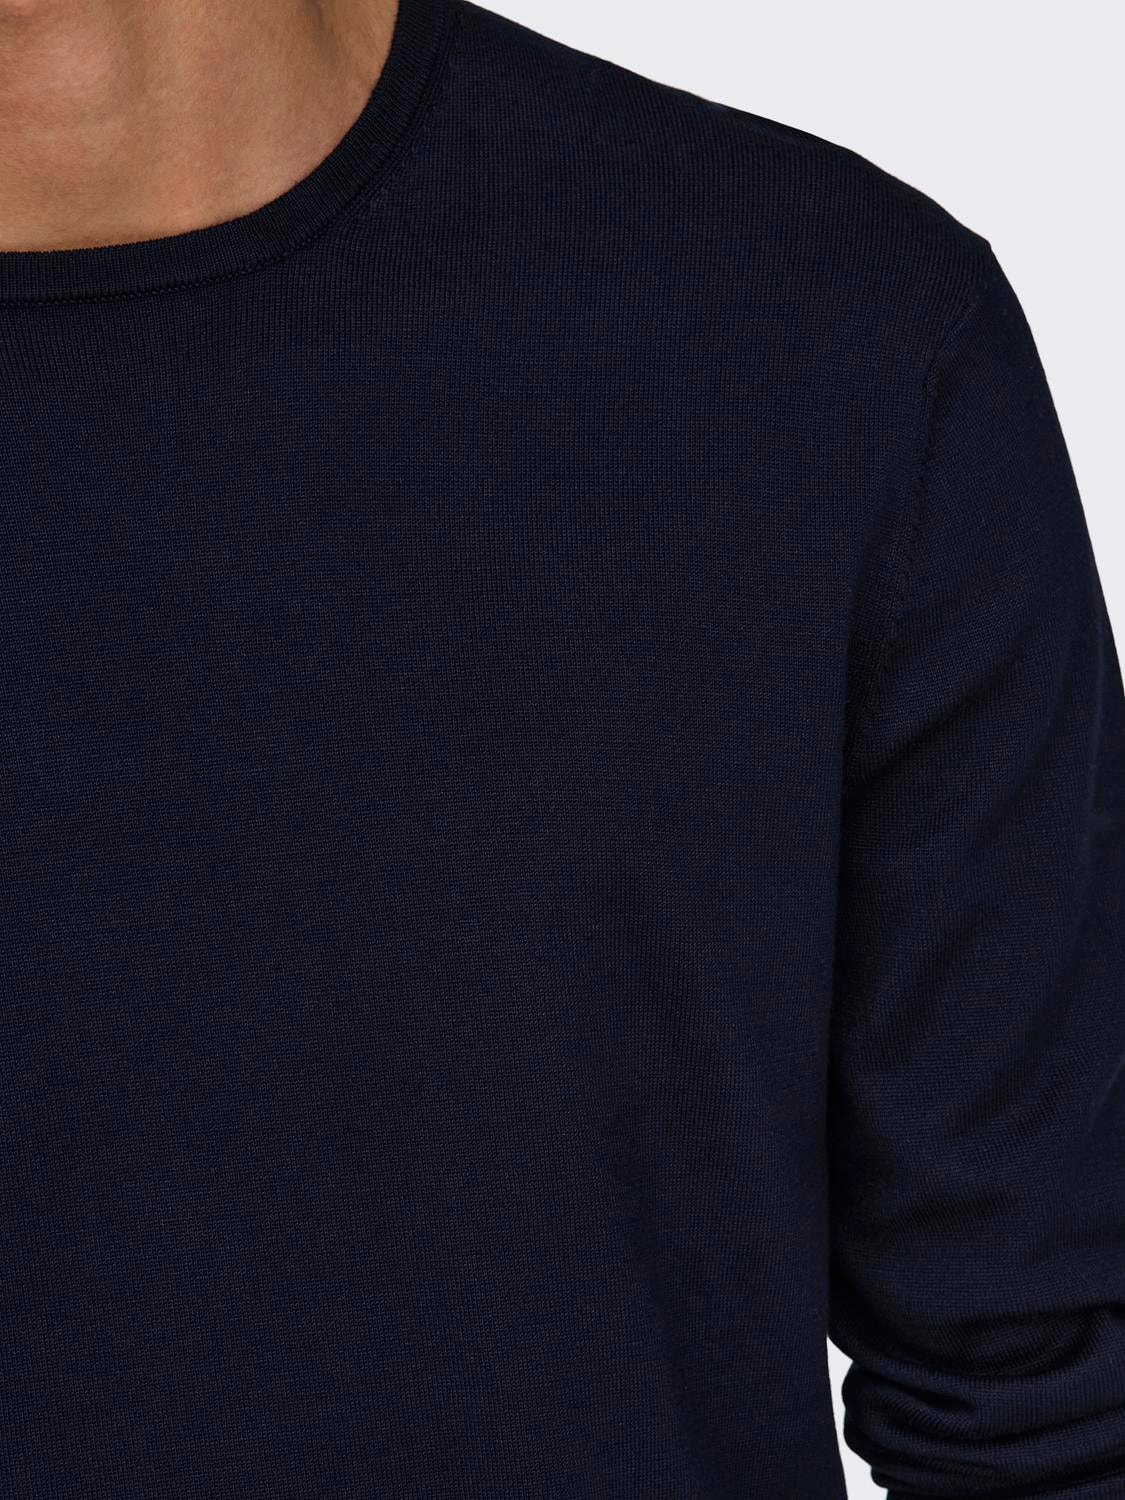 ONLY & SONS Solid color knitted pullover -Dark Navy - 22020088